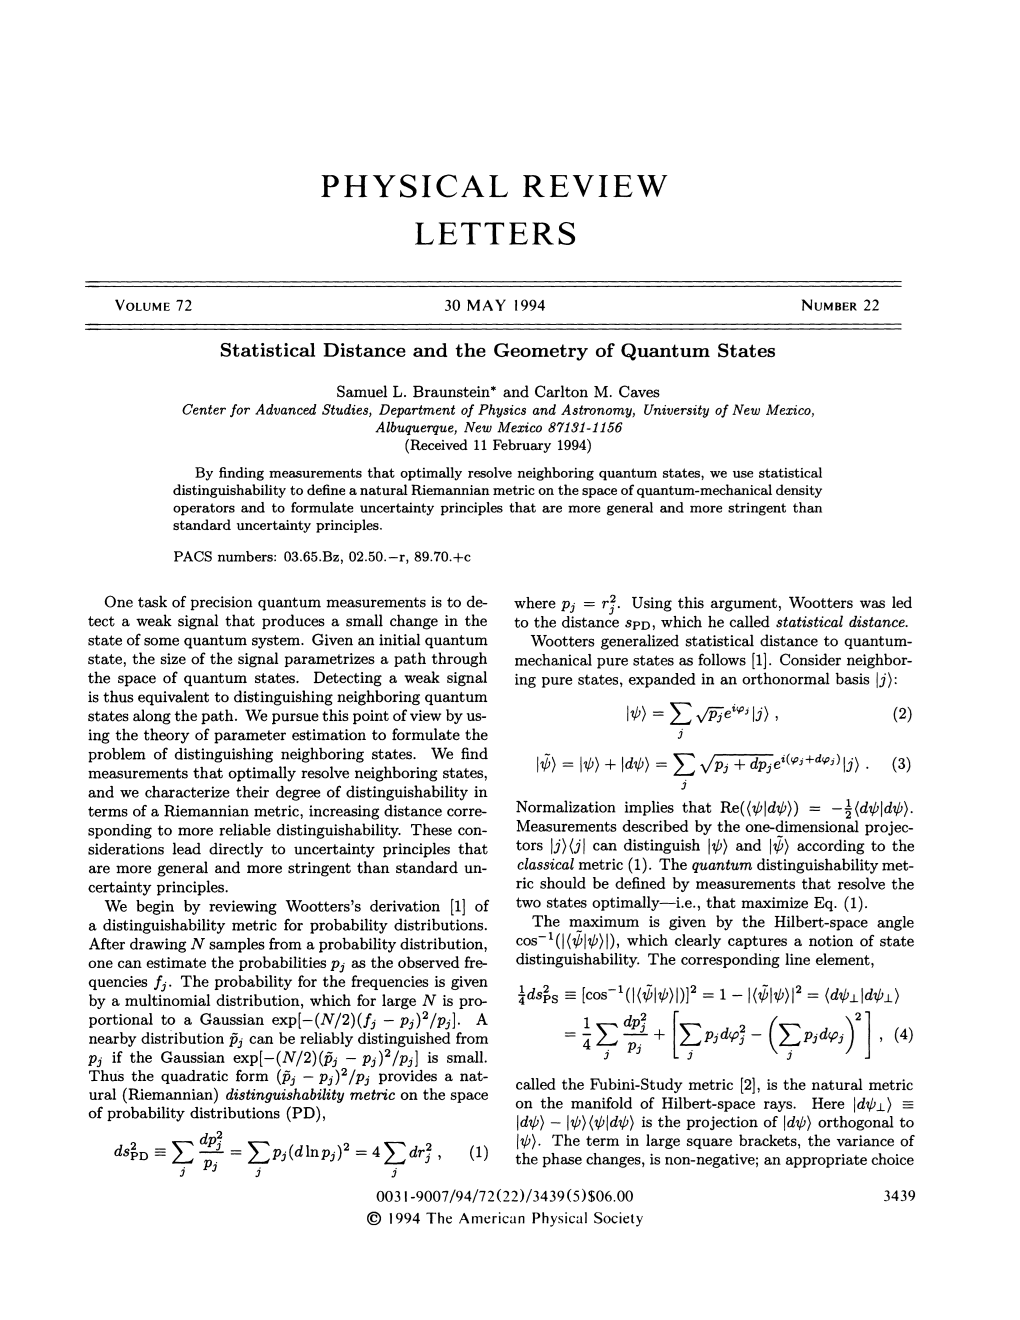 Statistical Distance and the Geometry of Quantum States